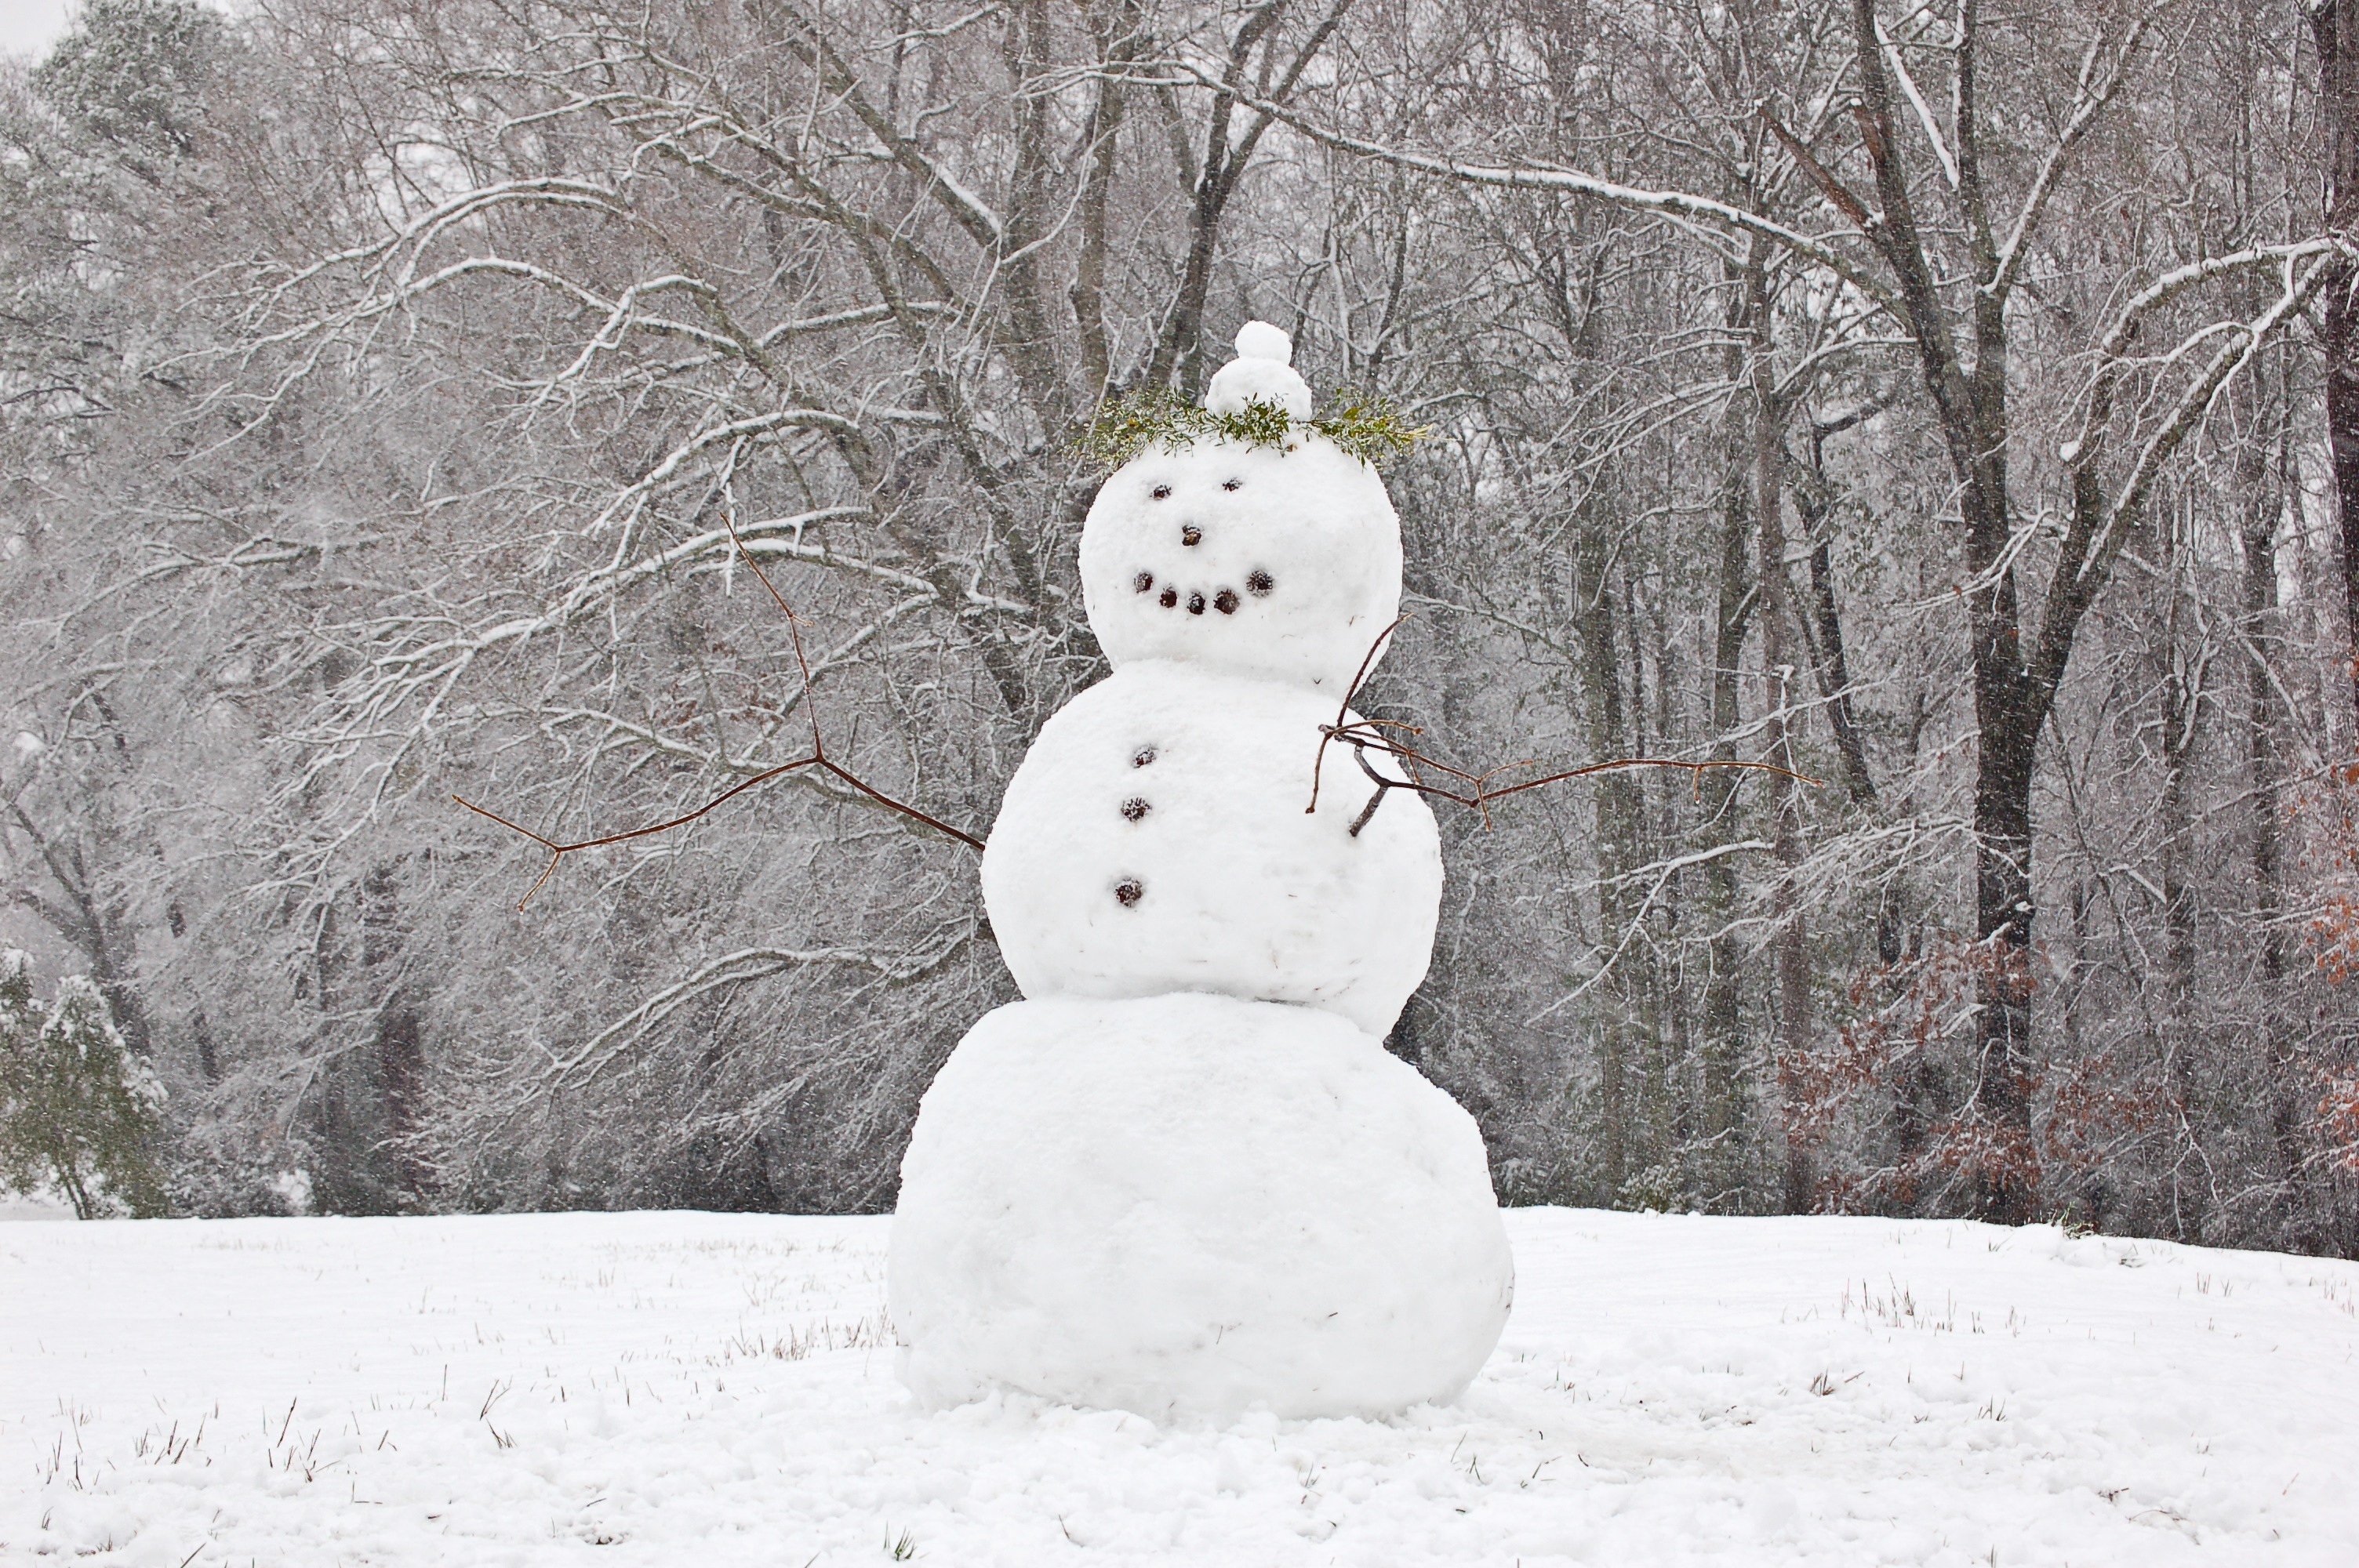 A Short Analysis of Wallace Stevens's 'The Snow Man' | Interesting ...